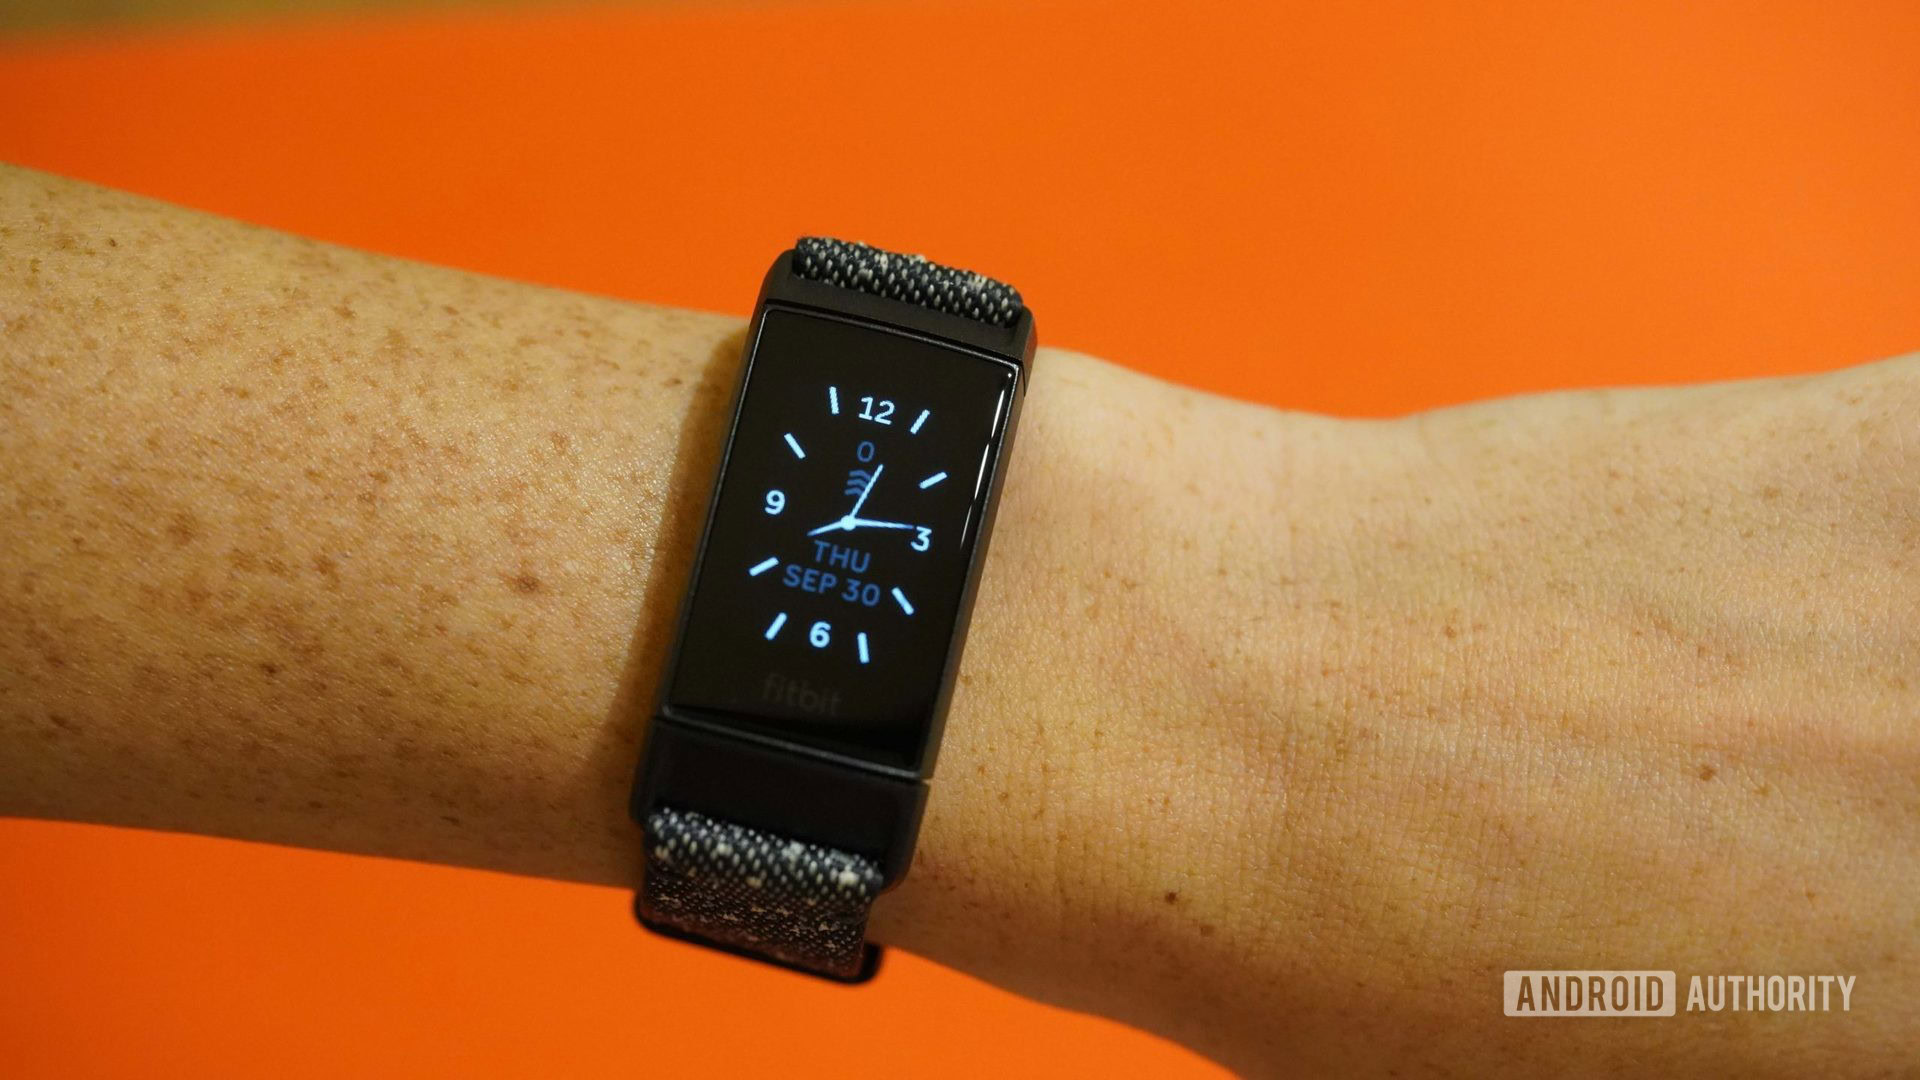 Fitbit Charge 4 displays the watch face on an orange background